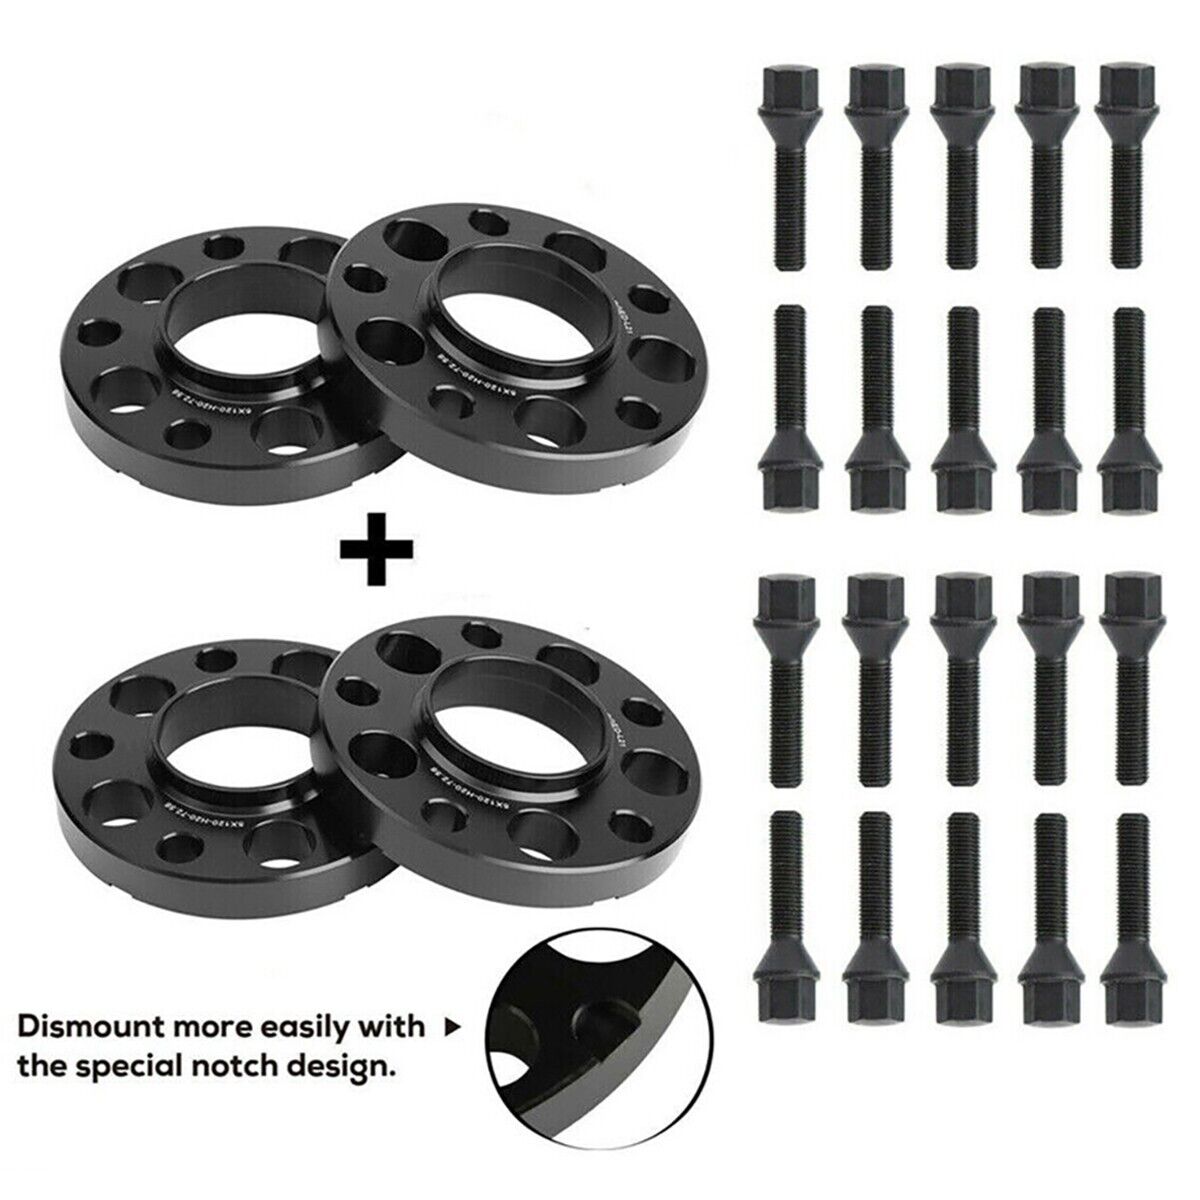 5x120 Staggered Wheel Spacers Kit (2) 15mm & (2) 20mm W/ Extended Bolts Fits BMW